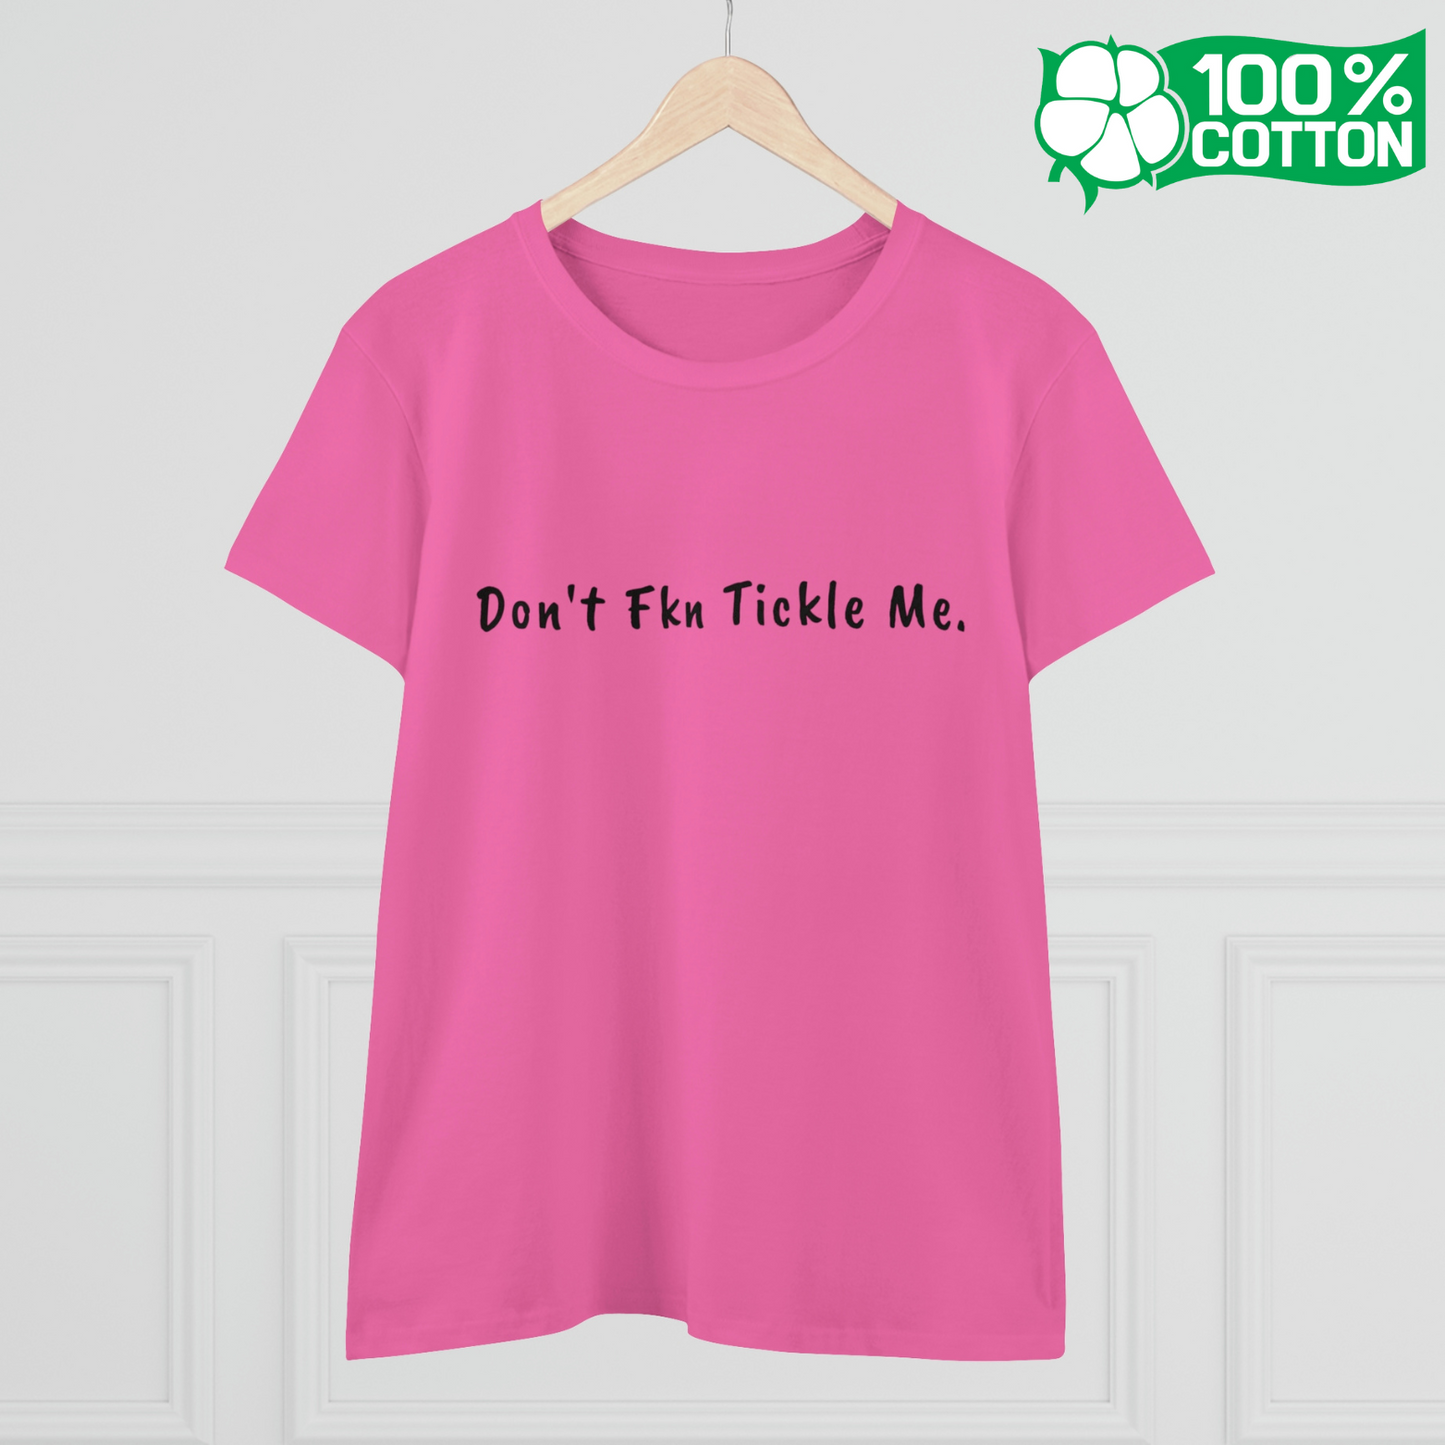 Don't Fkn Tickle Me - Women's Semi-Fitted Tee